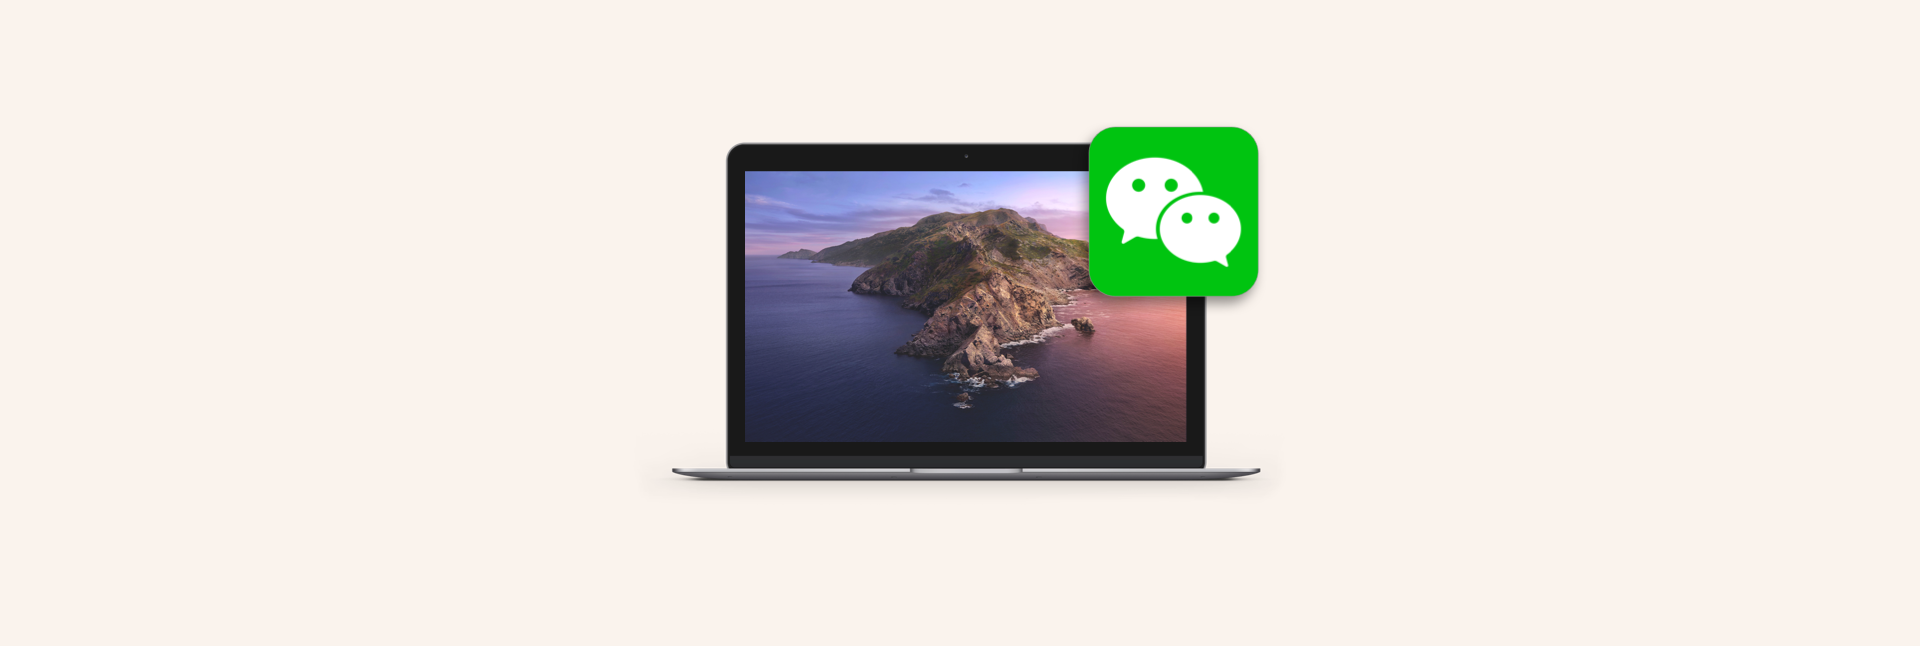 dowload wechat for mac